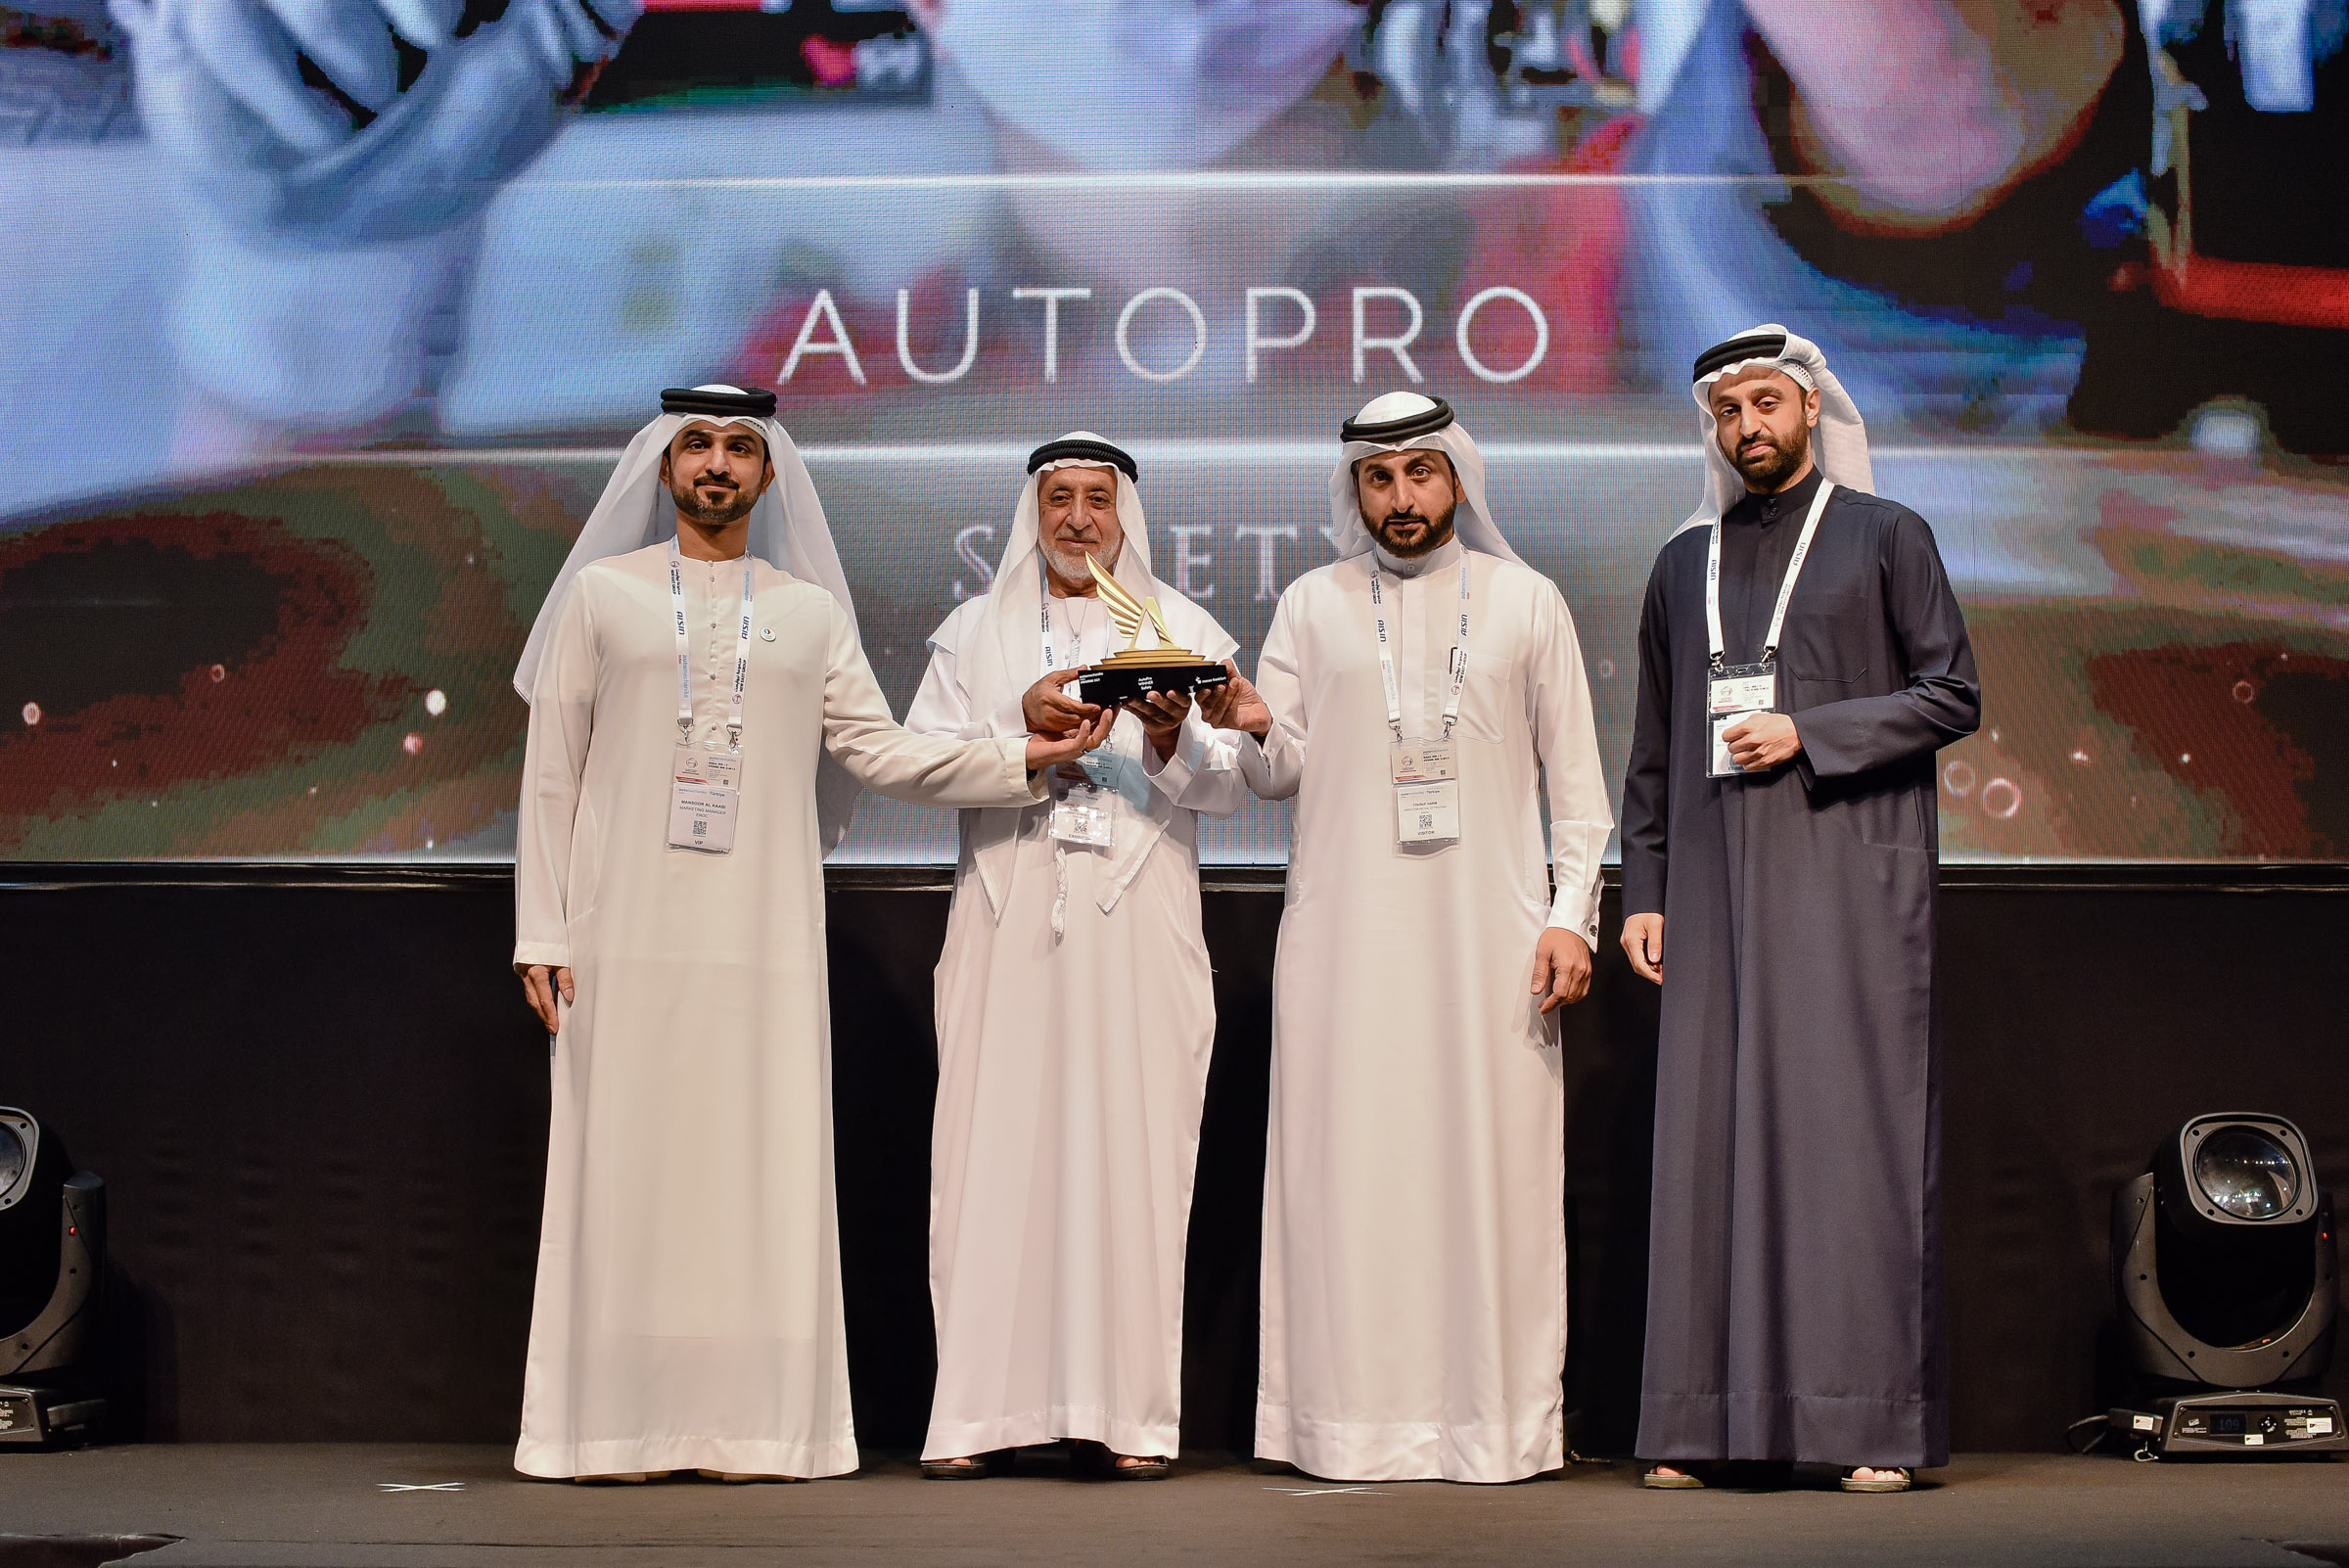 AutoPro, an ENOC Group company, recognised for quick service and safety at Automechanika Dubai